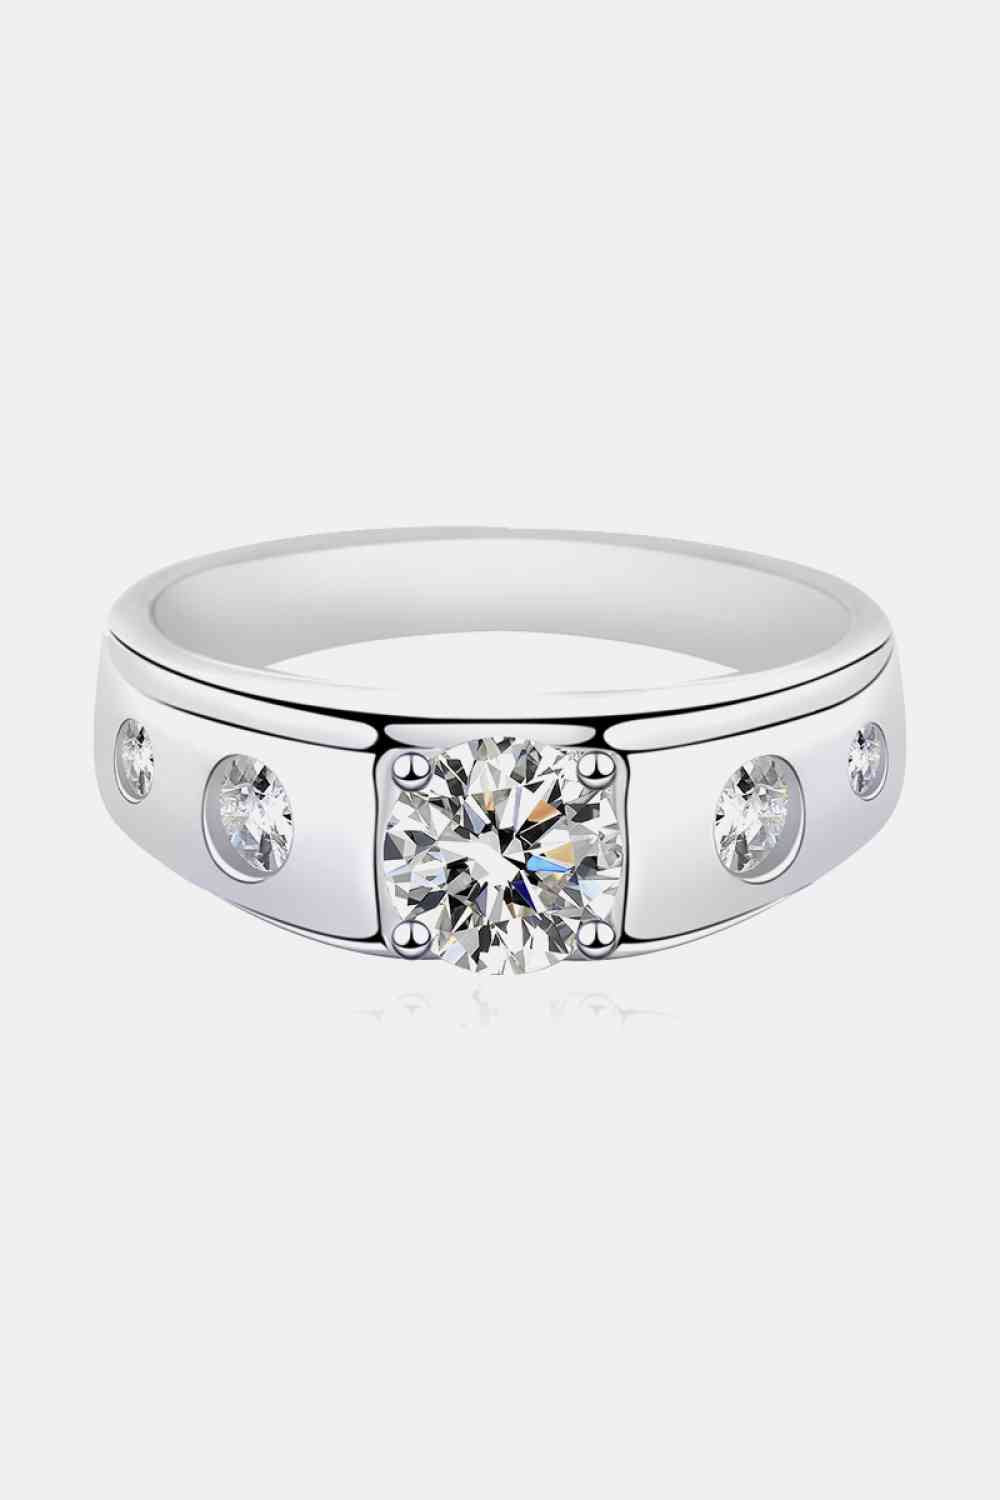 1 Carat Moissanite 925 Sterling Silver Ring - Shop Tophatter Deals, Electronics, Fashion, Jewelry, Health, Beauty, Home Decor, Free Shipping